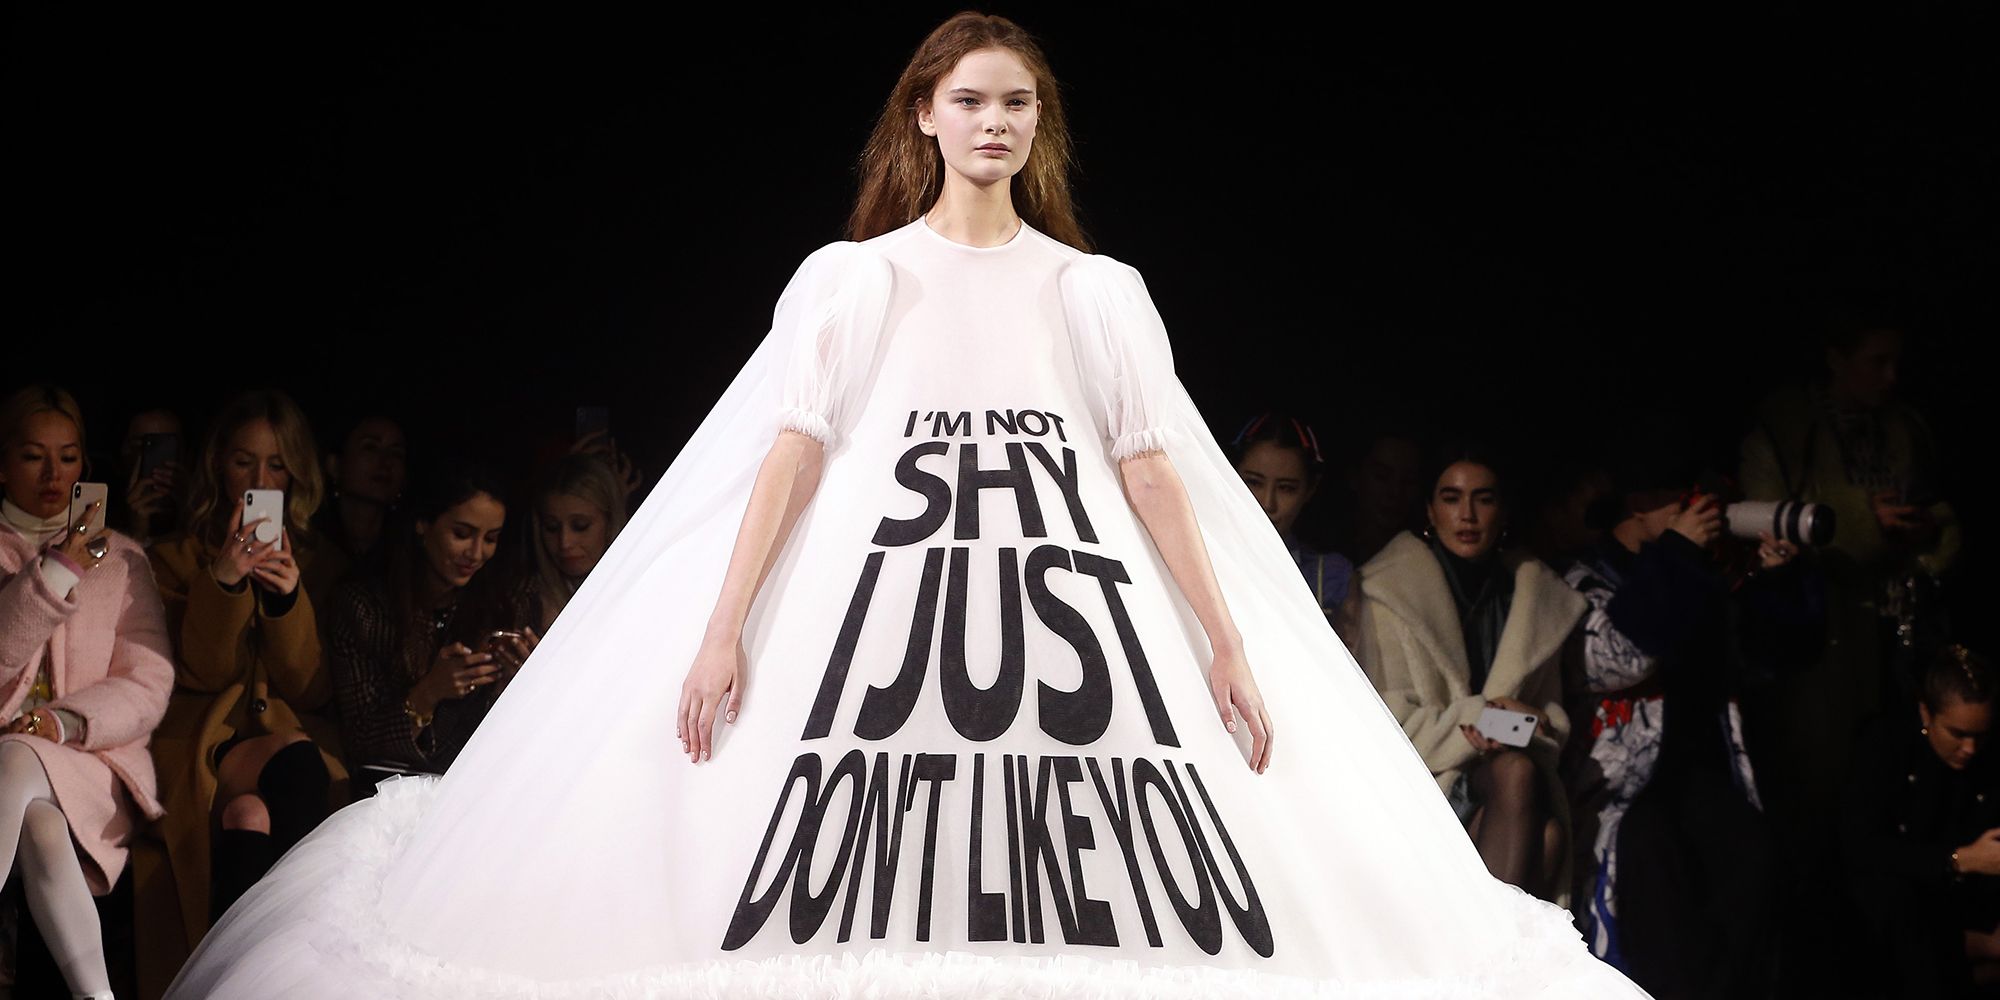 Viktor Rolf Sends Slogan Gowns Down The Runway At Paris Couture Week